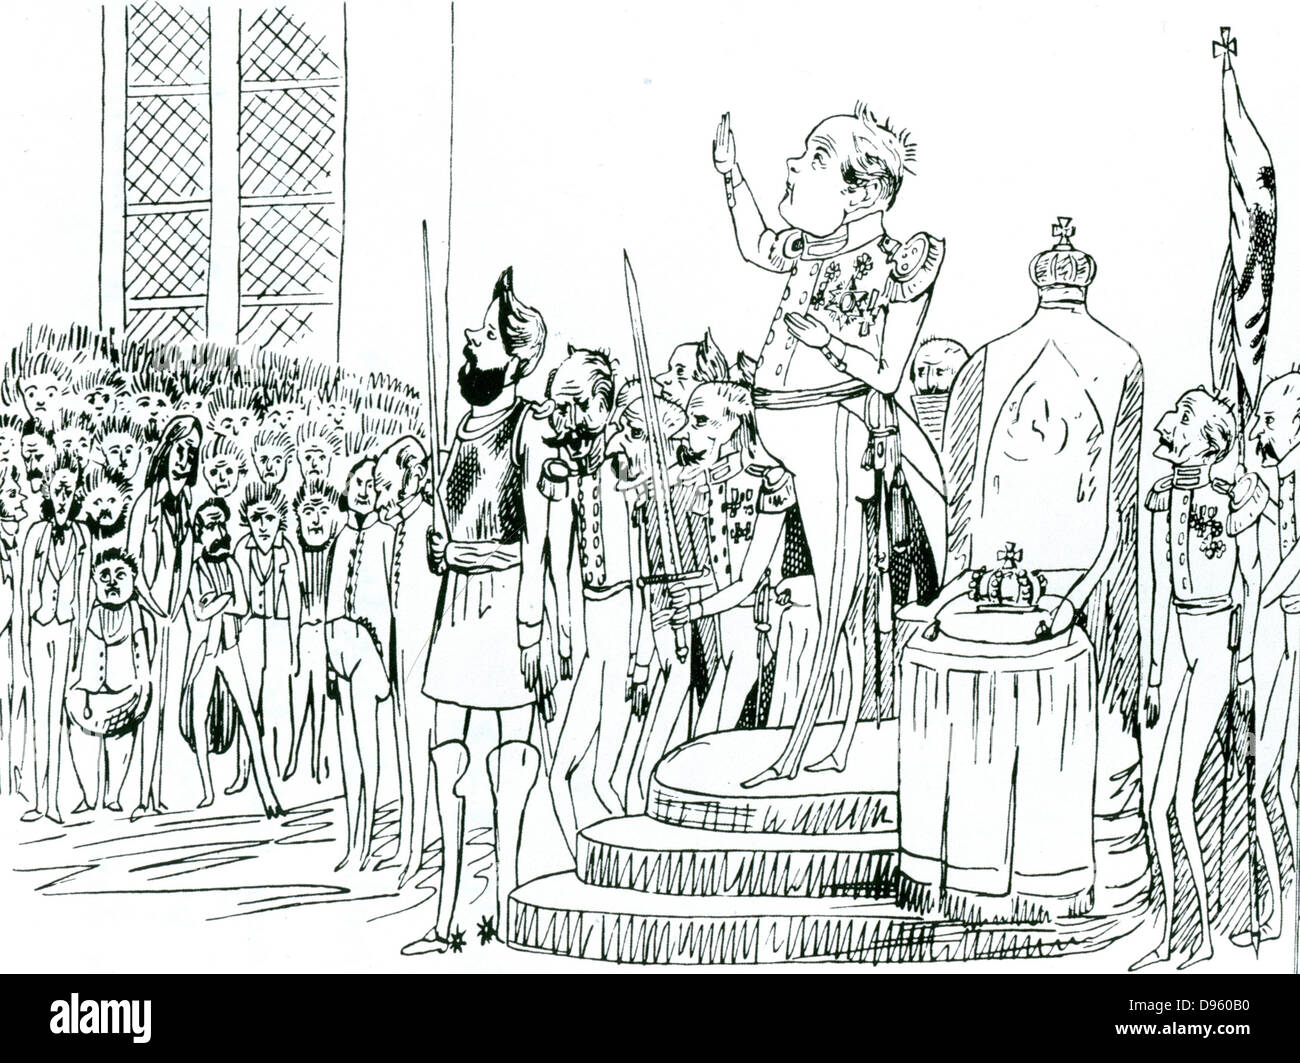 Frederick William IV (1795-1861), king of  of Prussia from 1840. Cartoon by Friedrich Engels showing Frederick William addressing the United Diet, 11 April 1847. Stock Photo